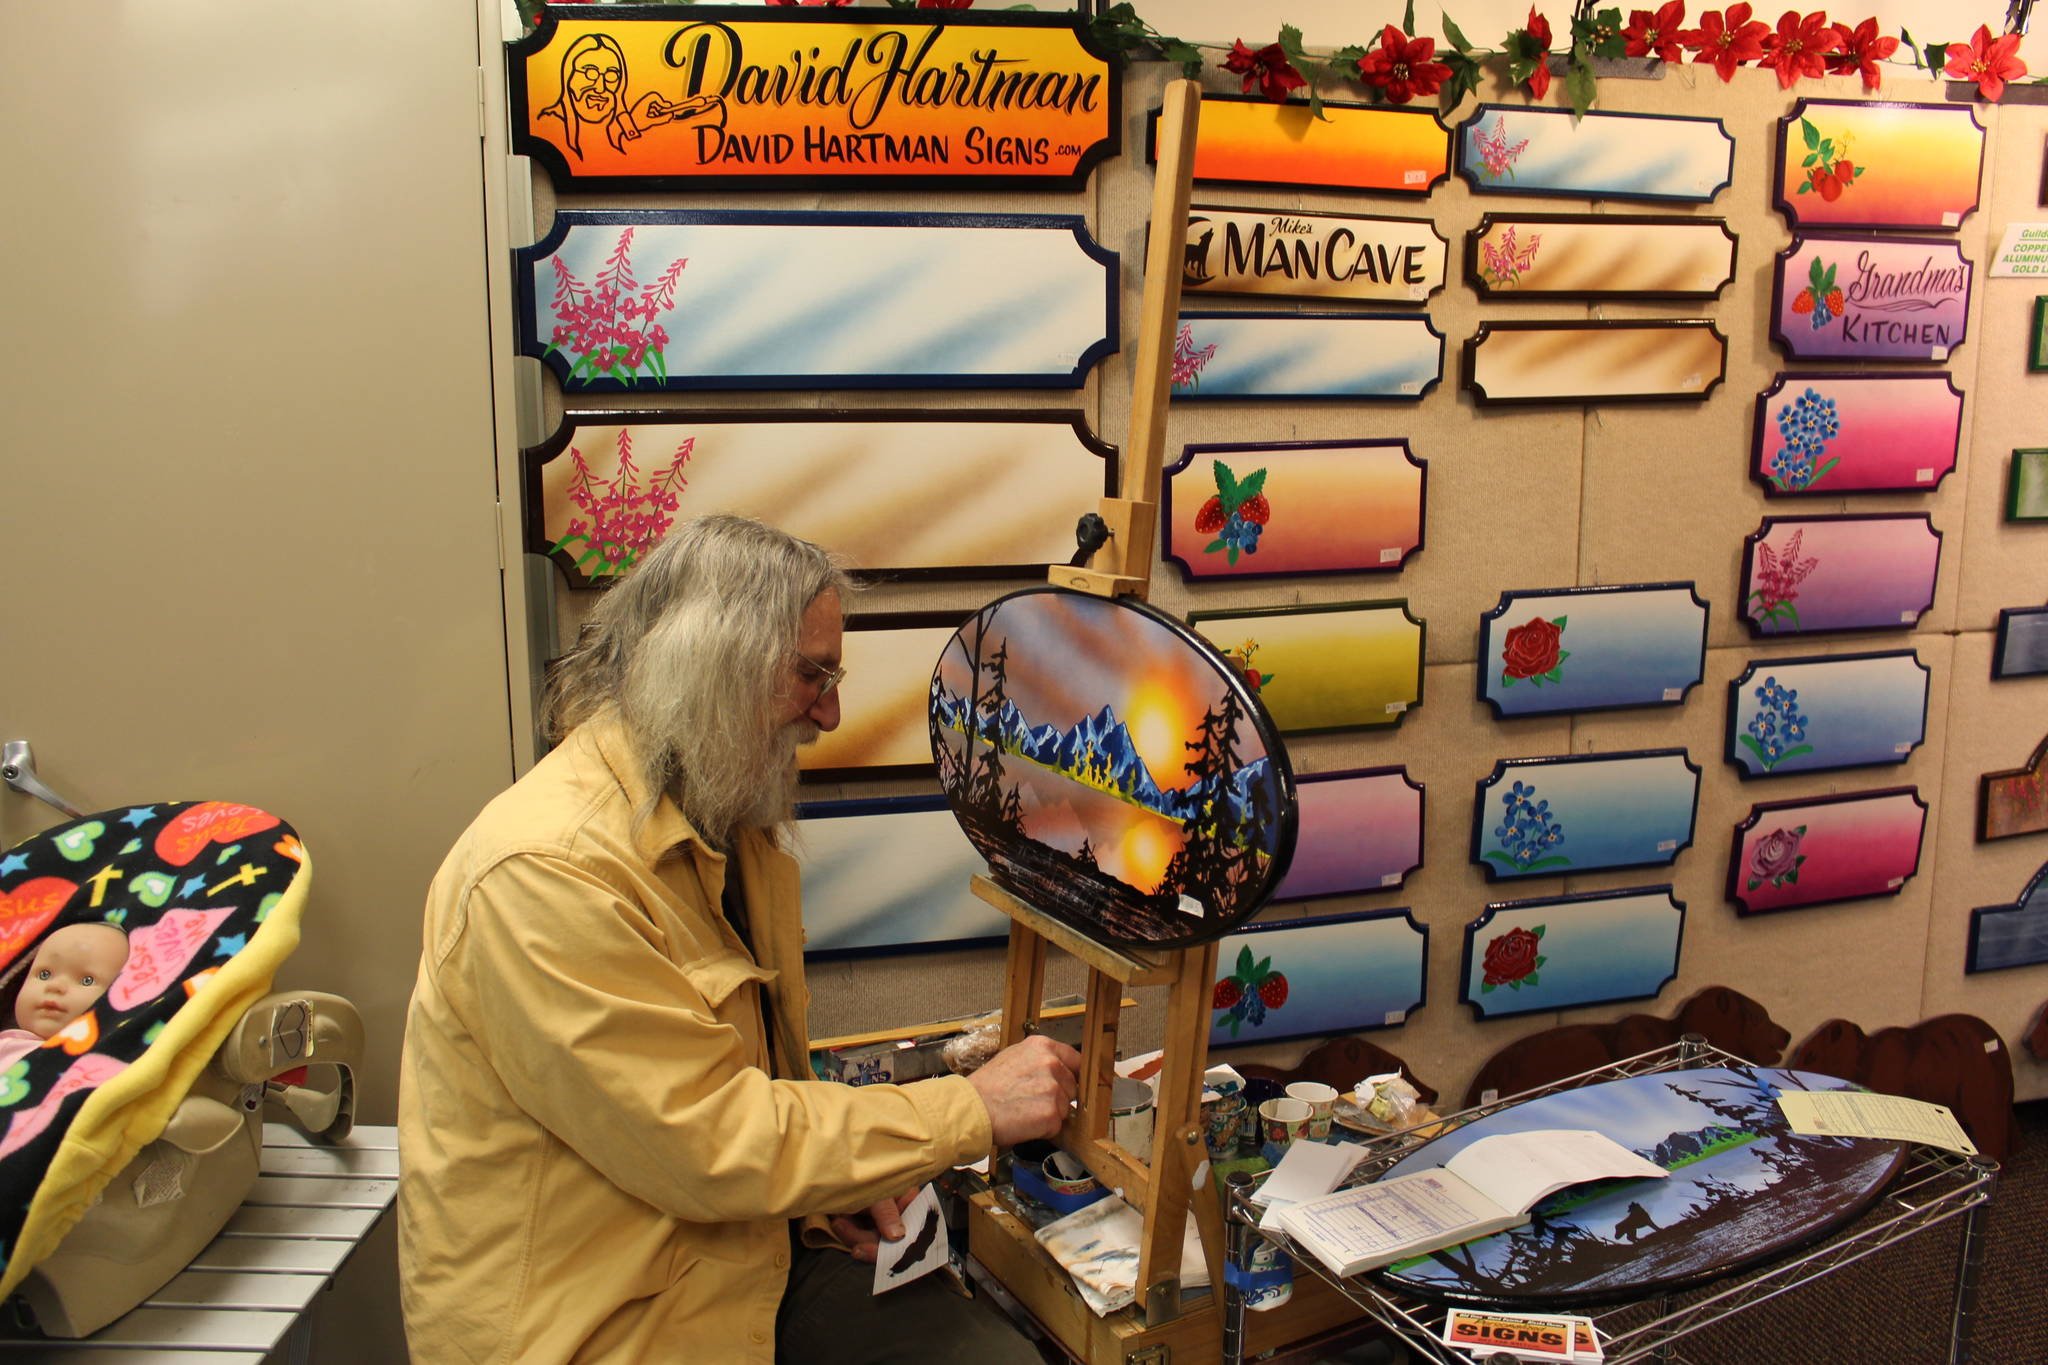 David Hartman paints and sells personalized signs at the annual Central Peninsula Hospital Auxiliary Holiday Bazaar in Soldotna, Alaska on Dec. 6, 2019. (Photo by Brian Mazurek/Peninsula Clarion)